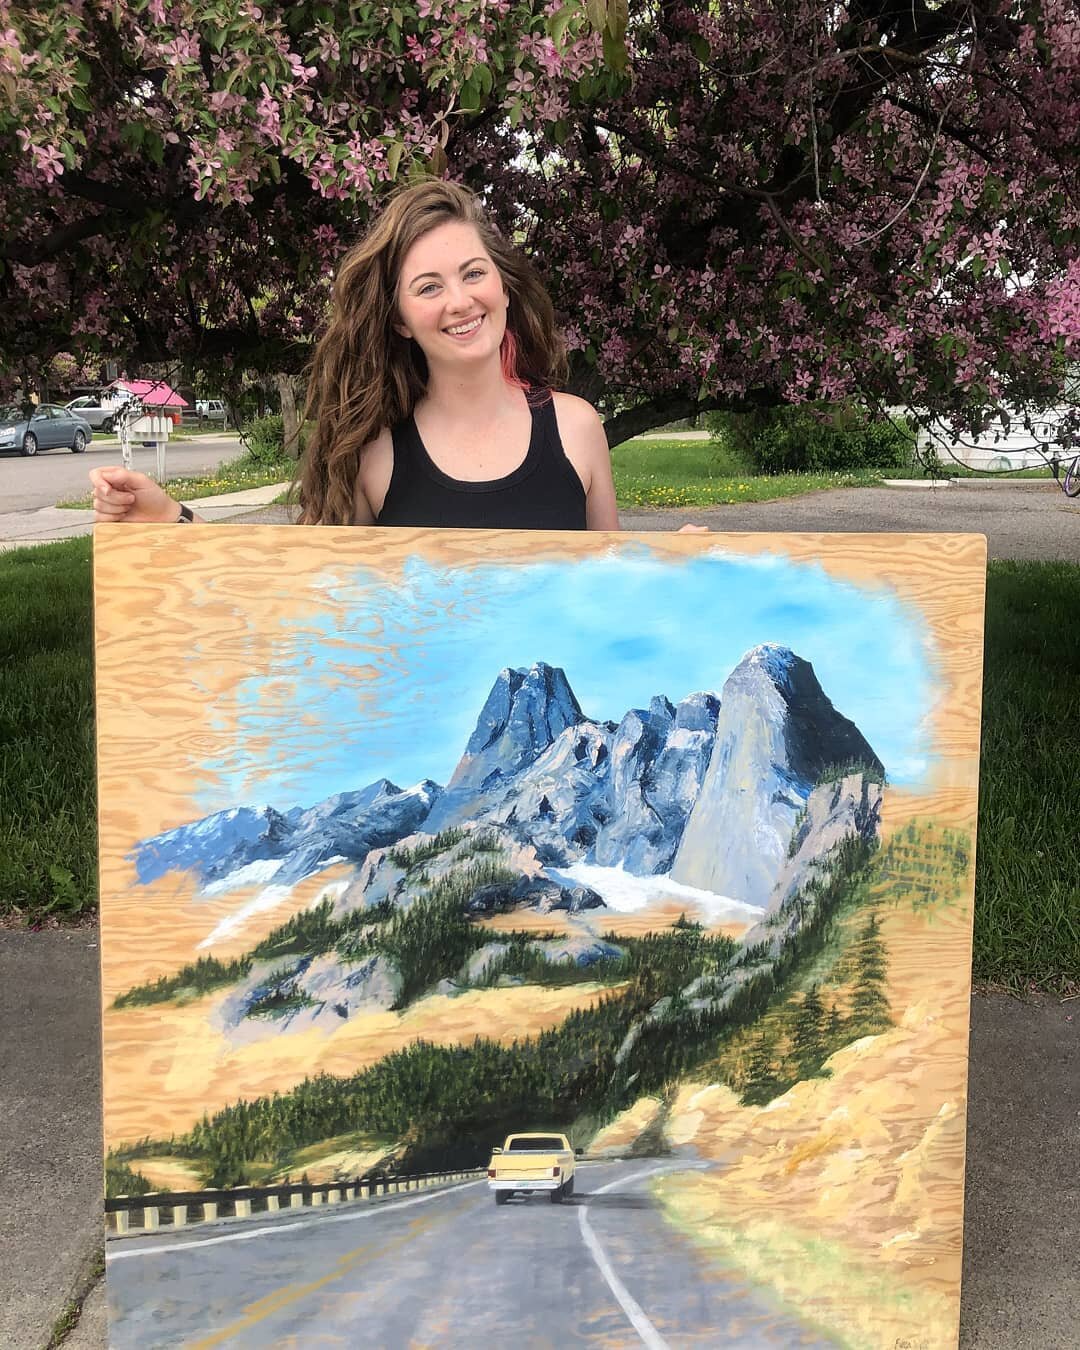 I have never known a life without nature or art. Growing up in the heart of the Cascade mountains, I drew inspiration from my surroundings from a young age. My paintings are a captured moment in time: a frozen memory that I can forever look back on a